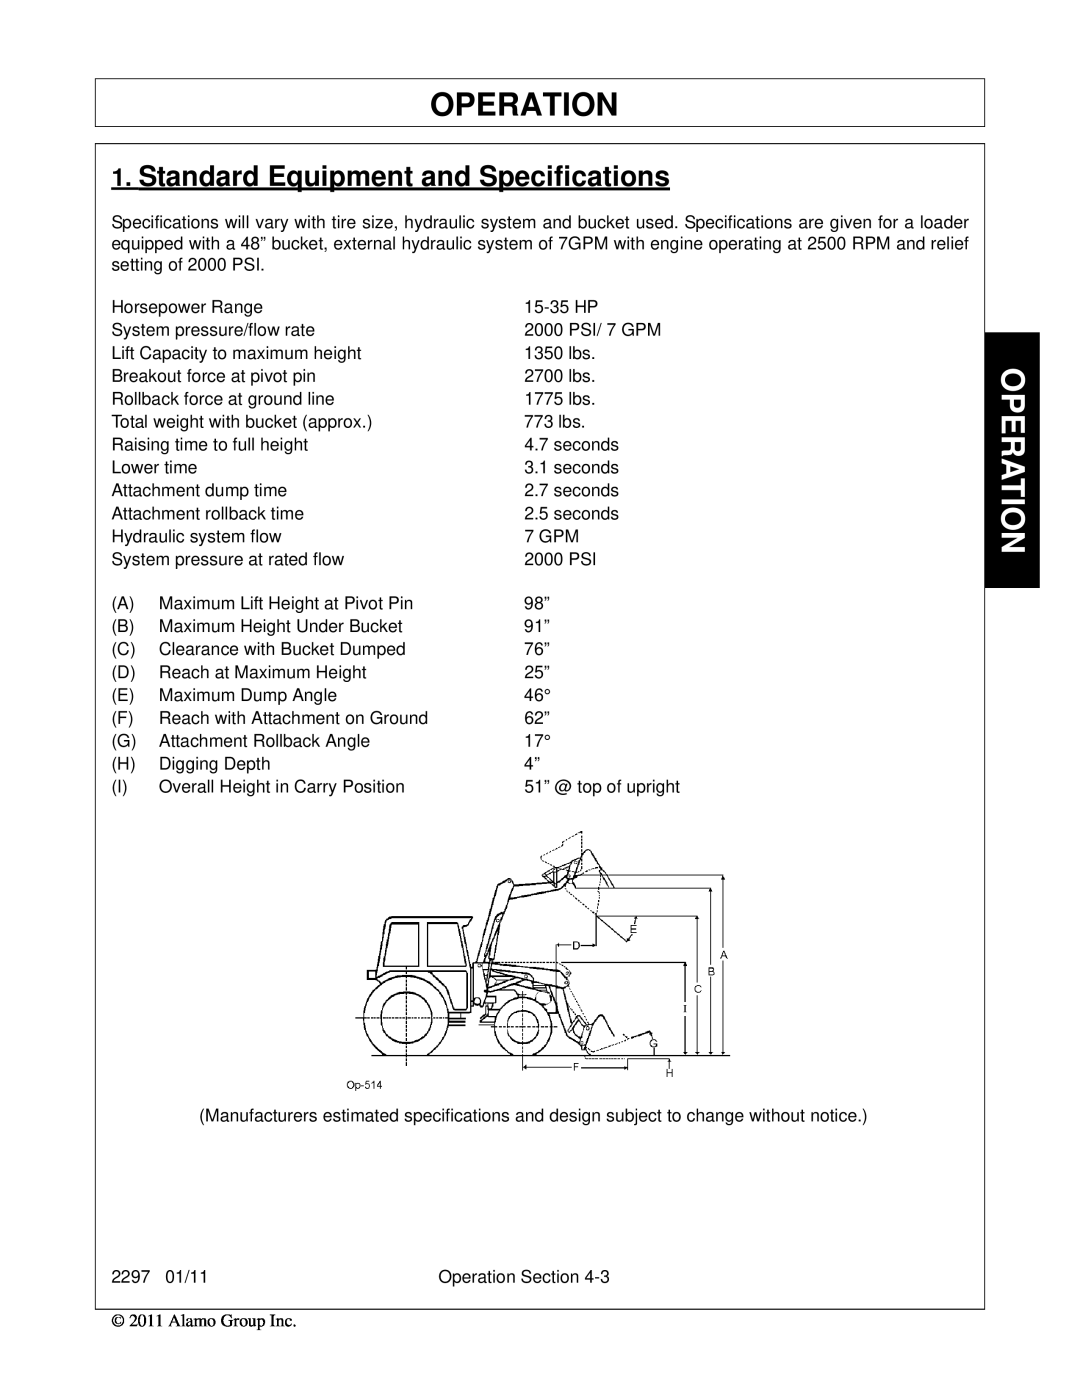 Bush Hog 2297 manual Operation, Standard Equipment and Specifications 